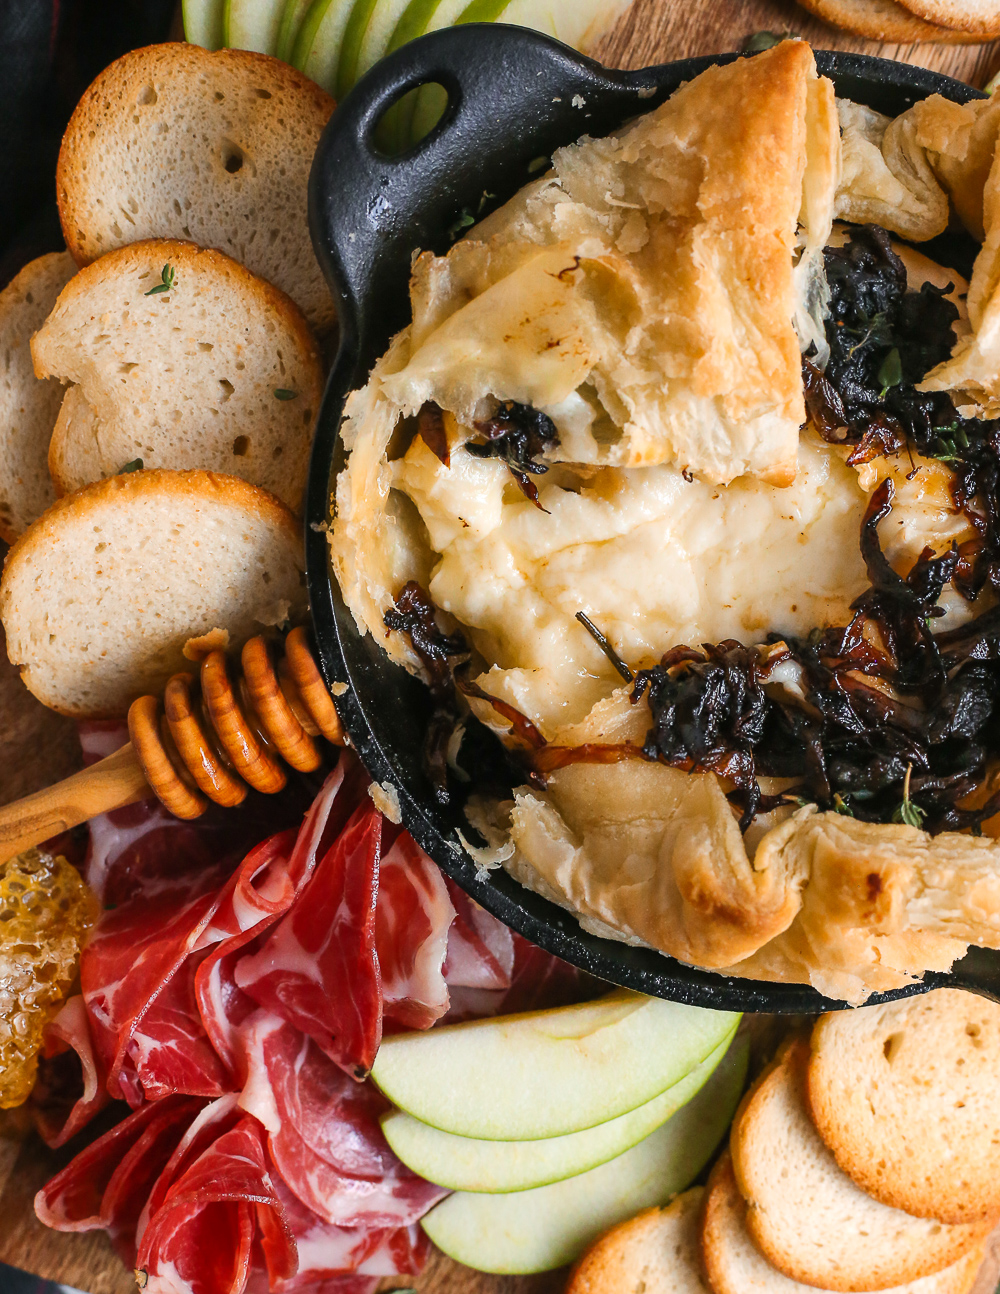 A close view into a baked brie appetizer wrapped in puff pastry and served on a charcuterie board. It's topped with dark caramelized onions and the cheese is gooey and melty